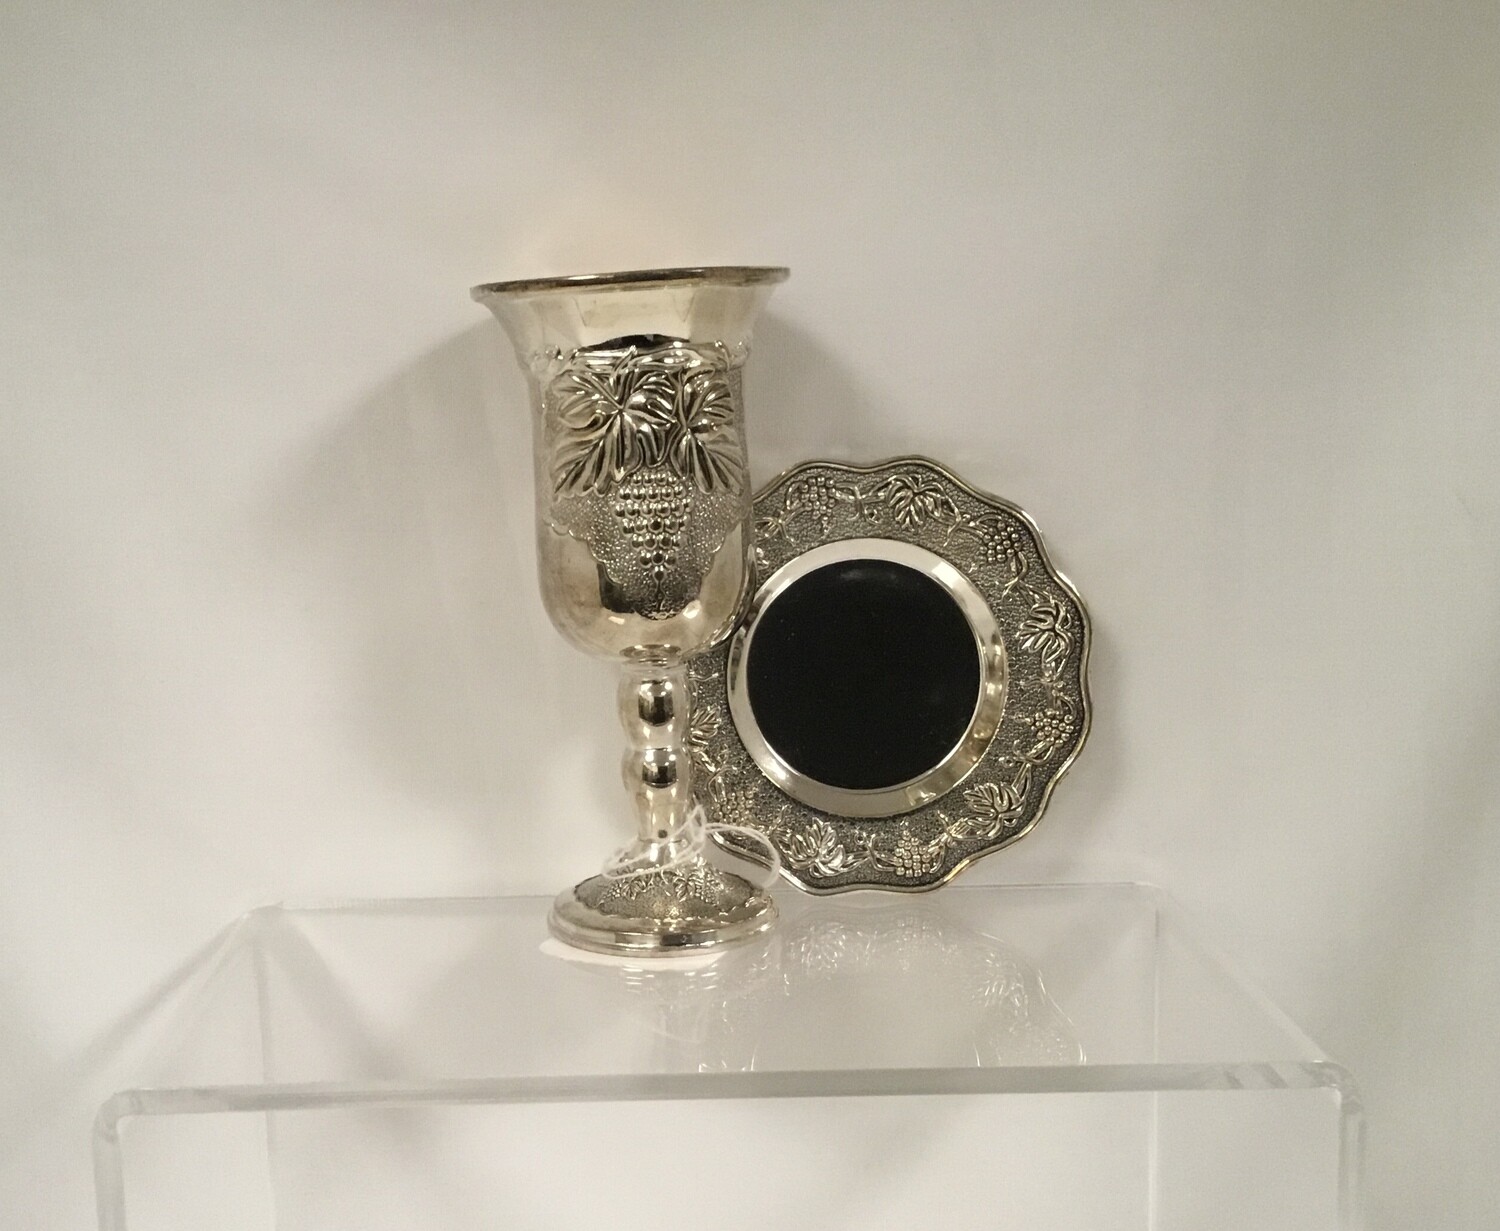 Kiddush Cup with Gold Filigree Inside with Tray